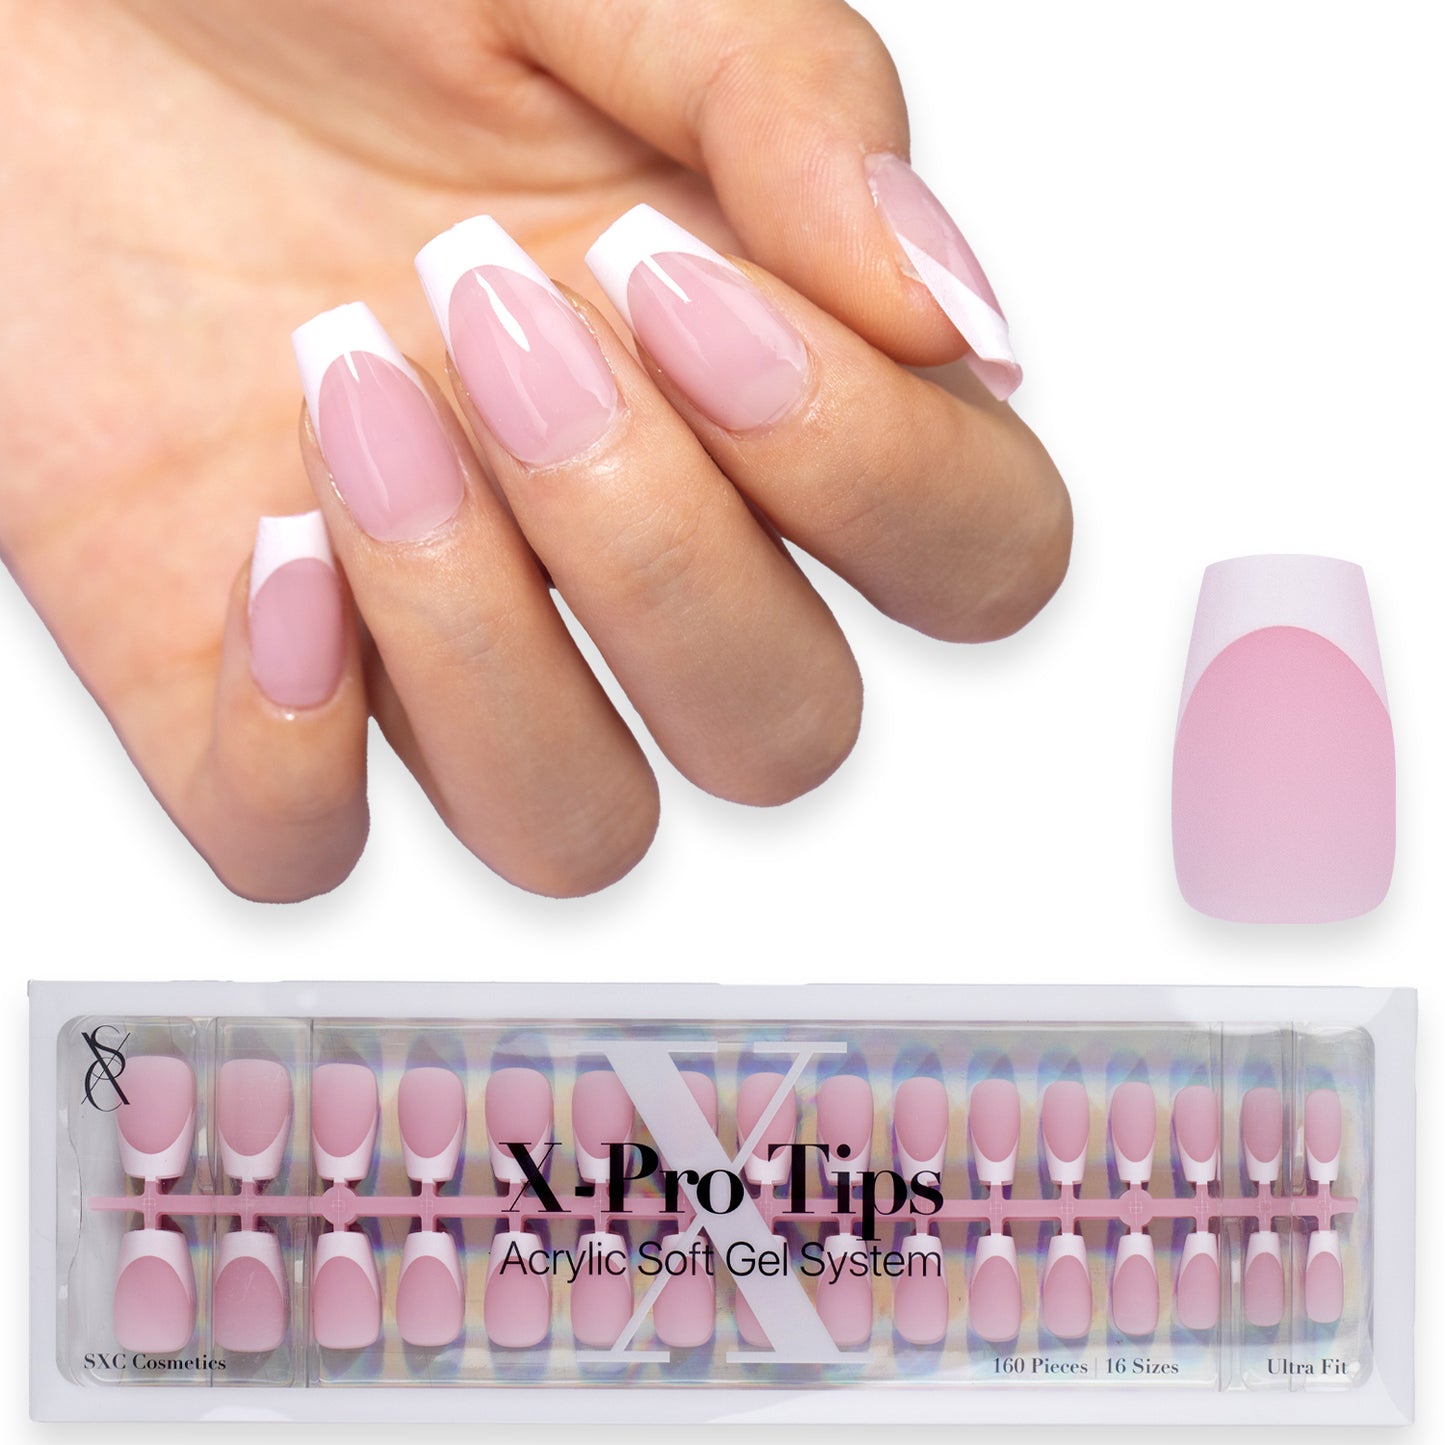 SXC Cosmetics X-Pro Tips Press on Nails, Pink Short Coffin French Tips, 160 Pieces in 16 Sizes Ultra Fit Acrylic Soft Gel System